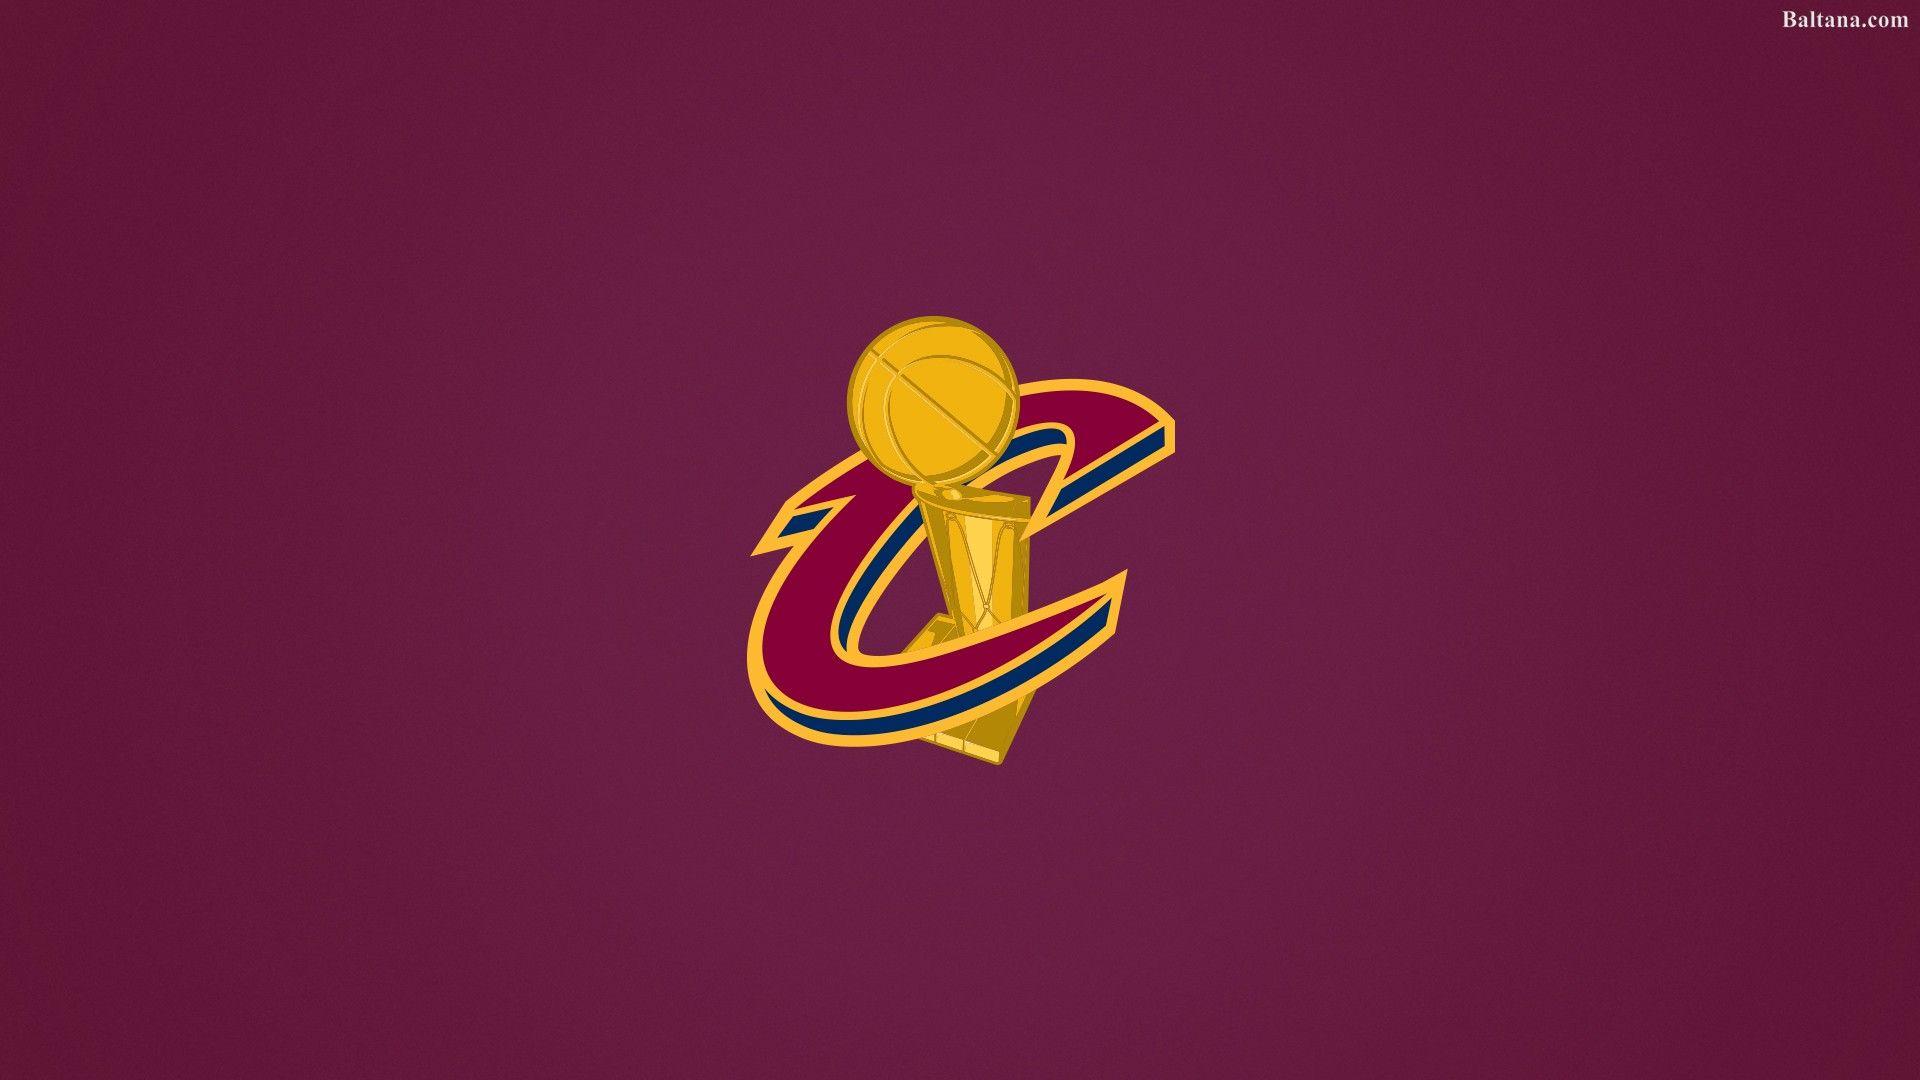 Download Cleveland Cavaliers wallpapers for mobile phone free Cleveland  Cavaliers HD pictures